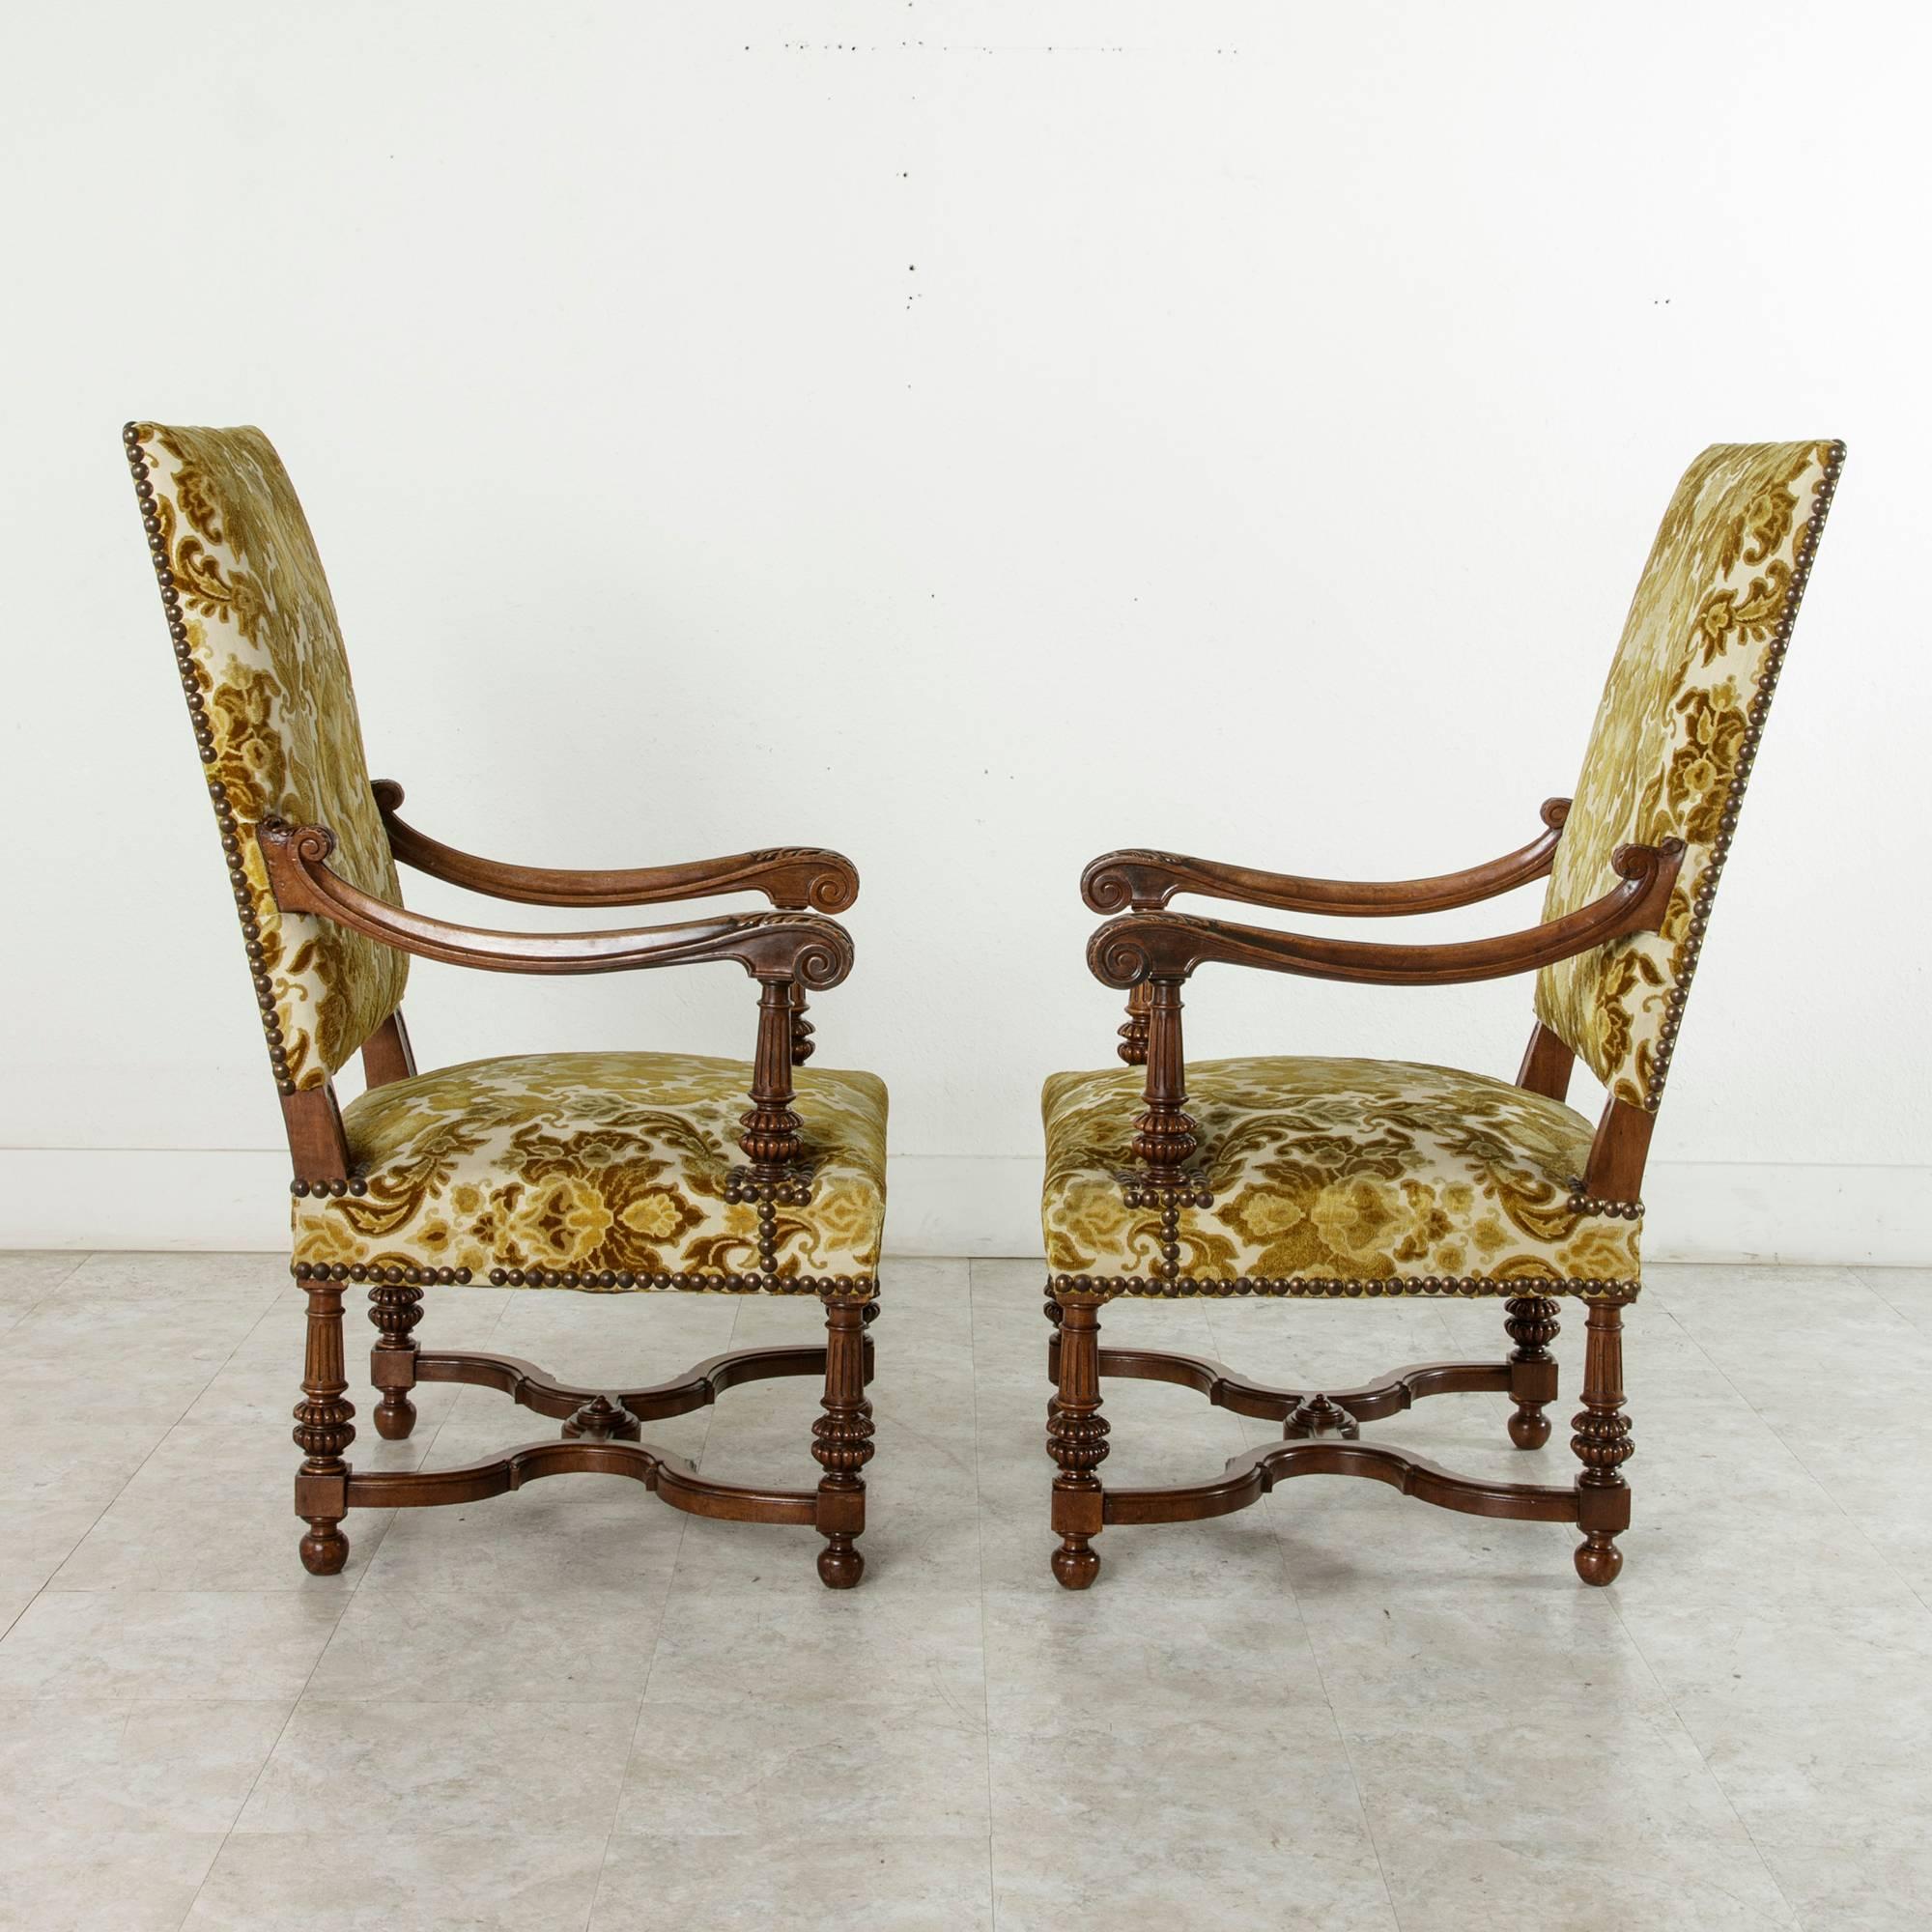 Upholstery Pair of Late 19th Century French Hand-Carved Walnut Louis XIV Style Armchairs